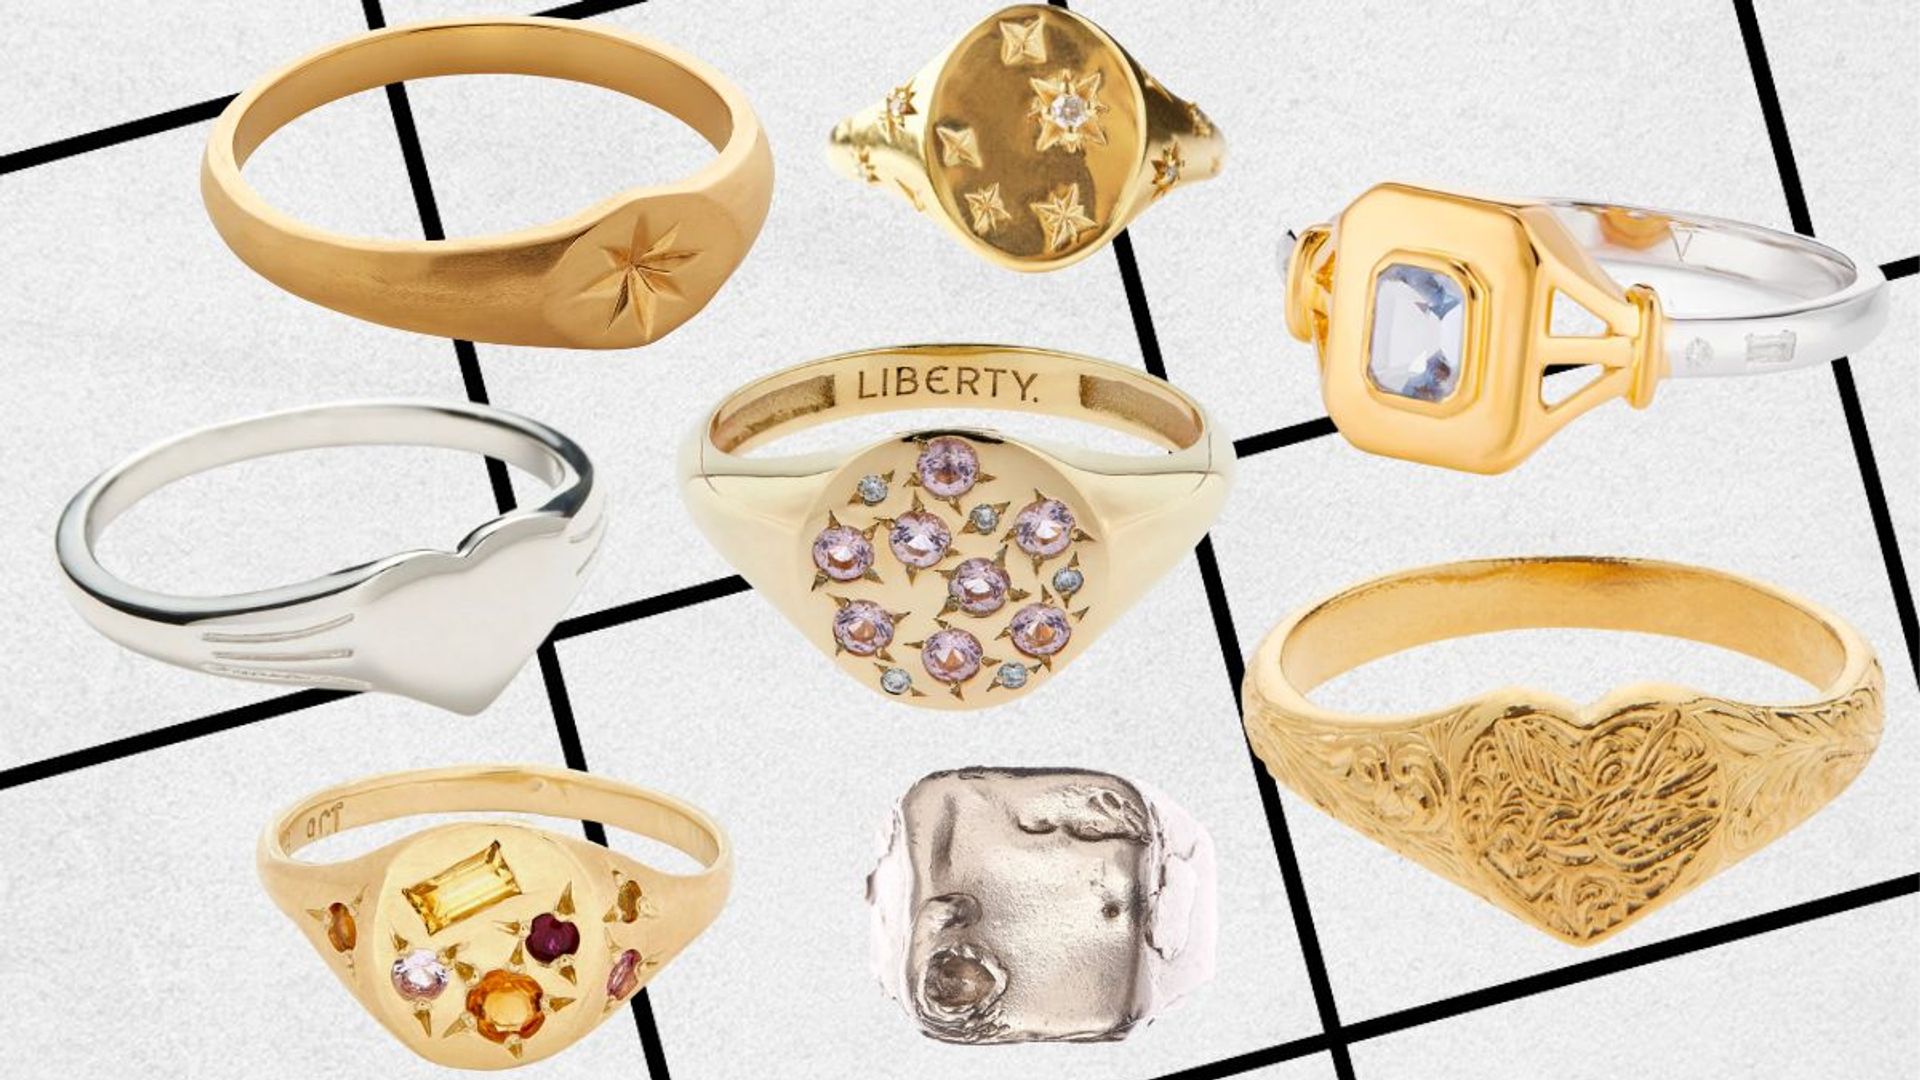 Signet rings are officially back on the agenda thanks to One Day's